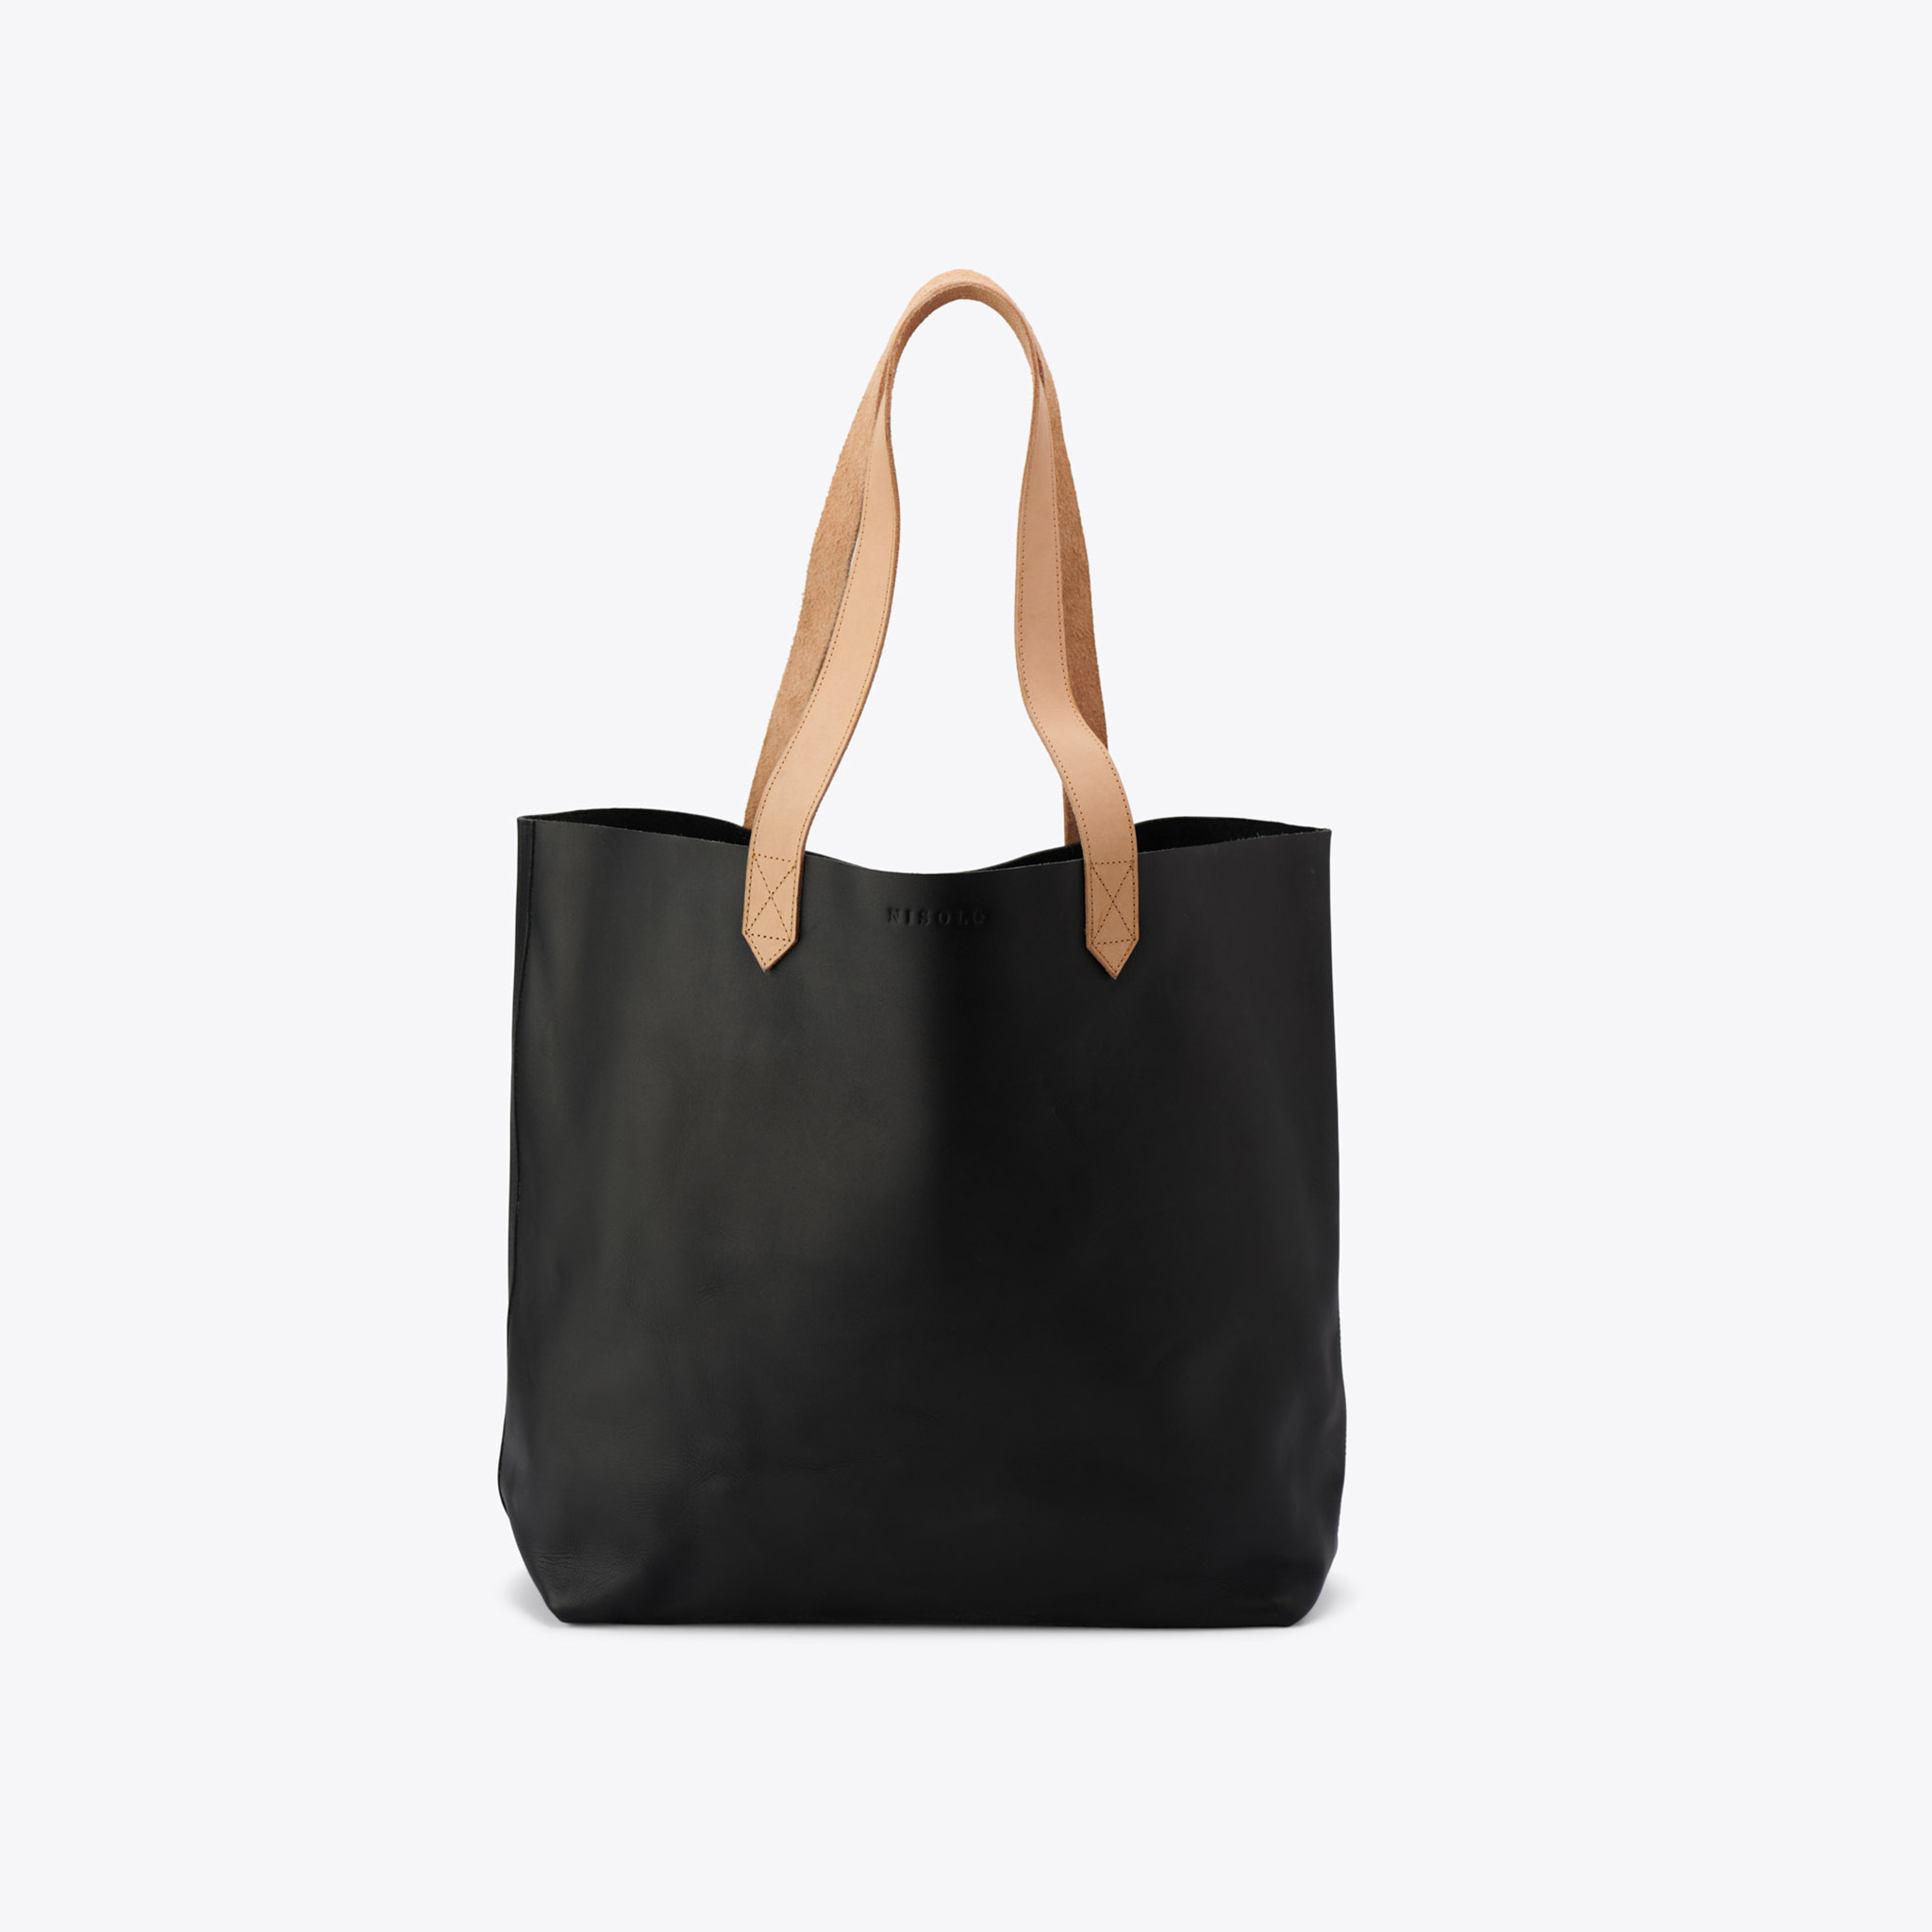 Nisolo Lori Tote Black/Natural - Every Nisolo product is built on the foundation of comfort, function, and design. 